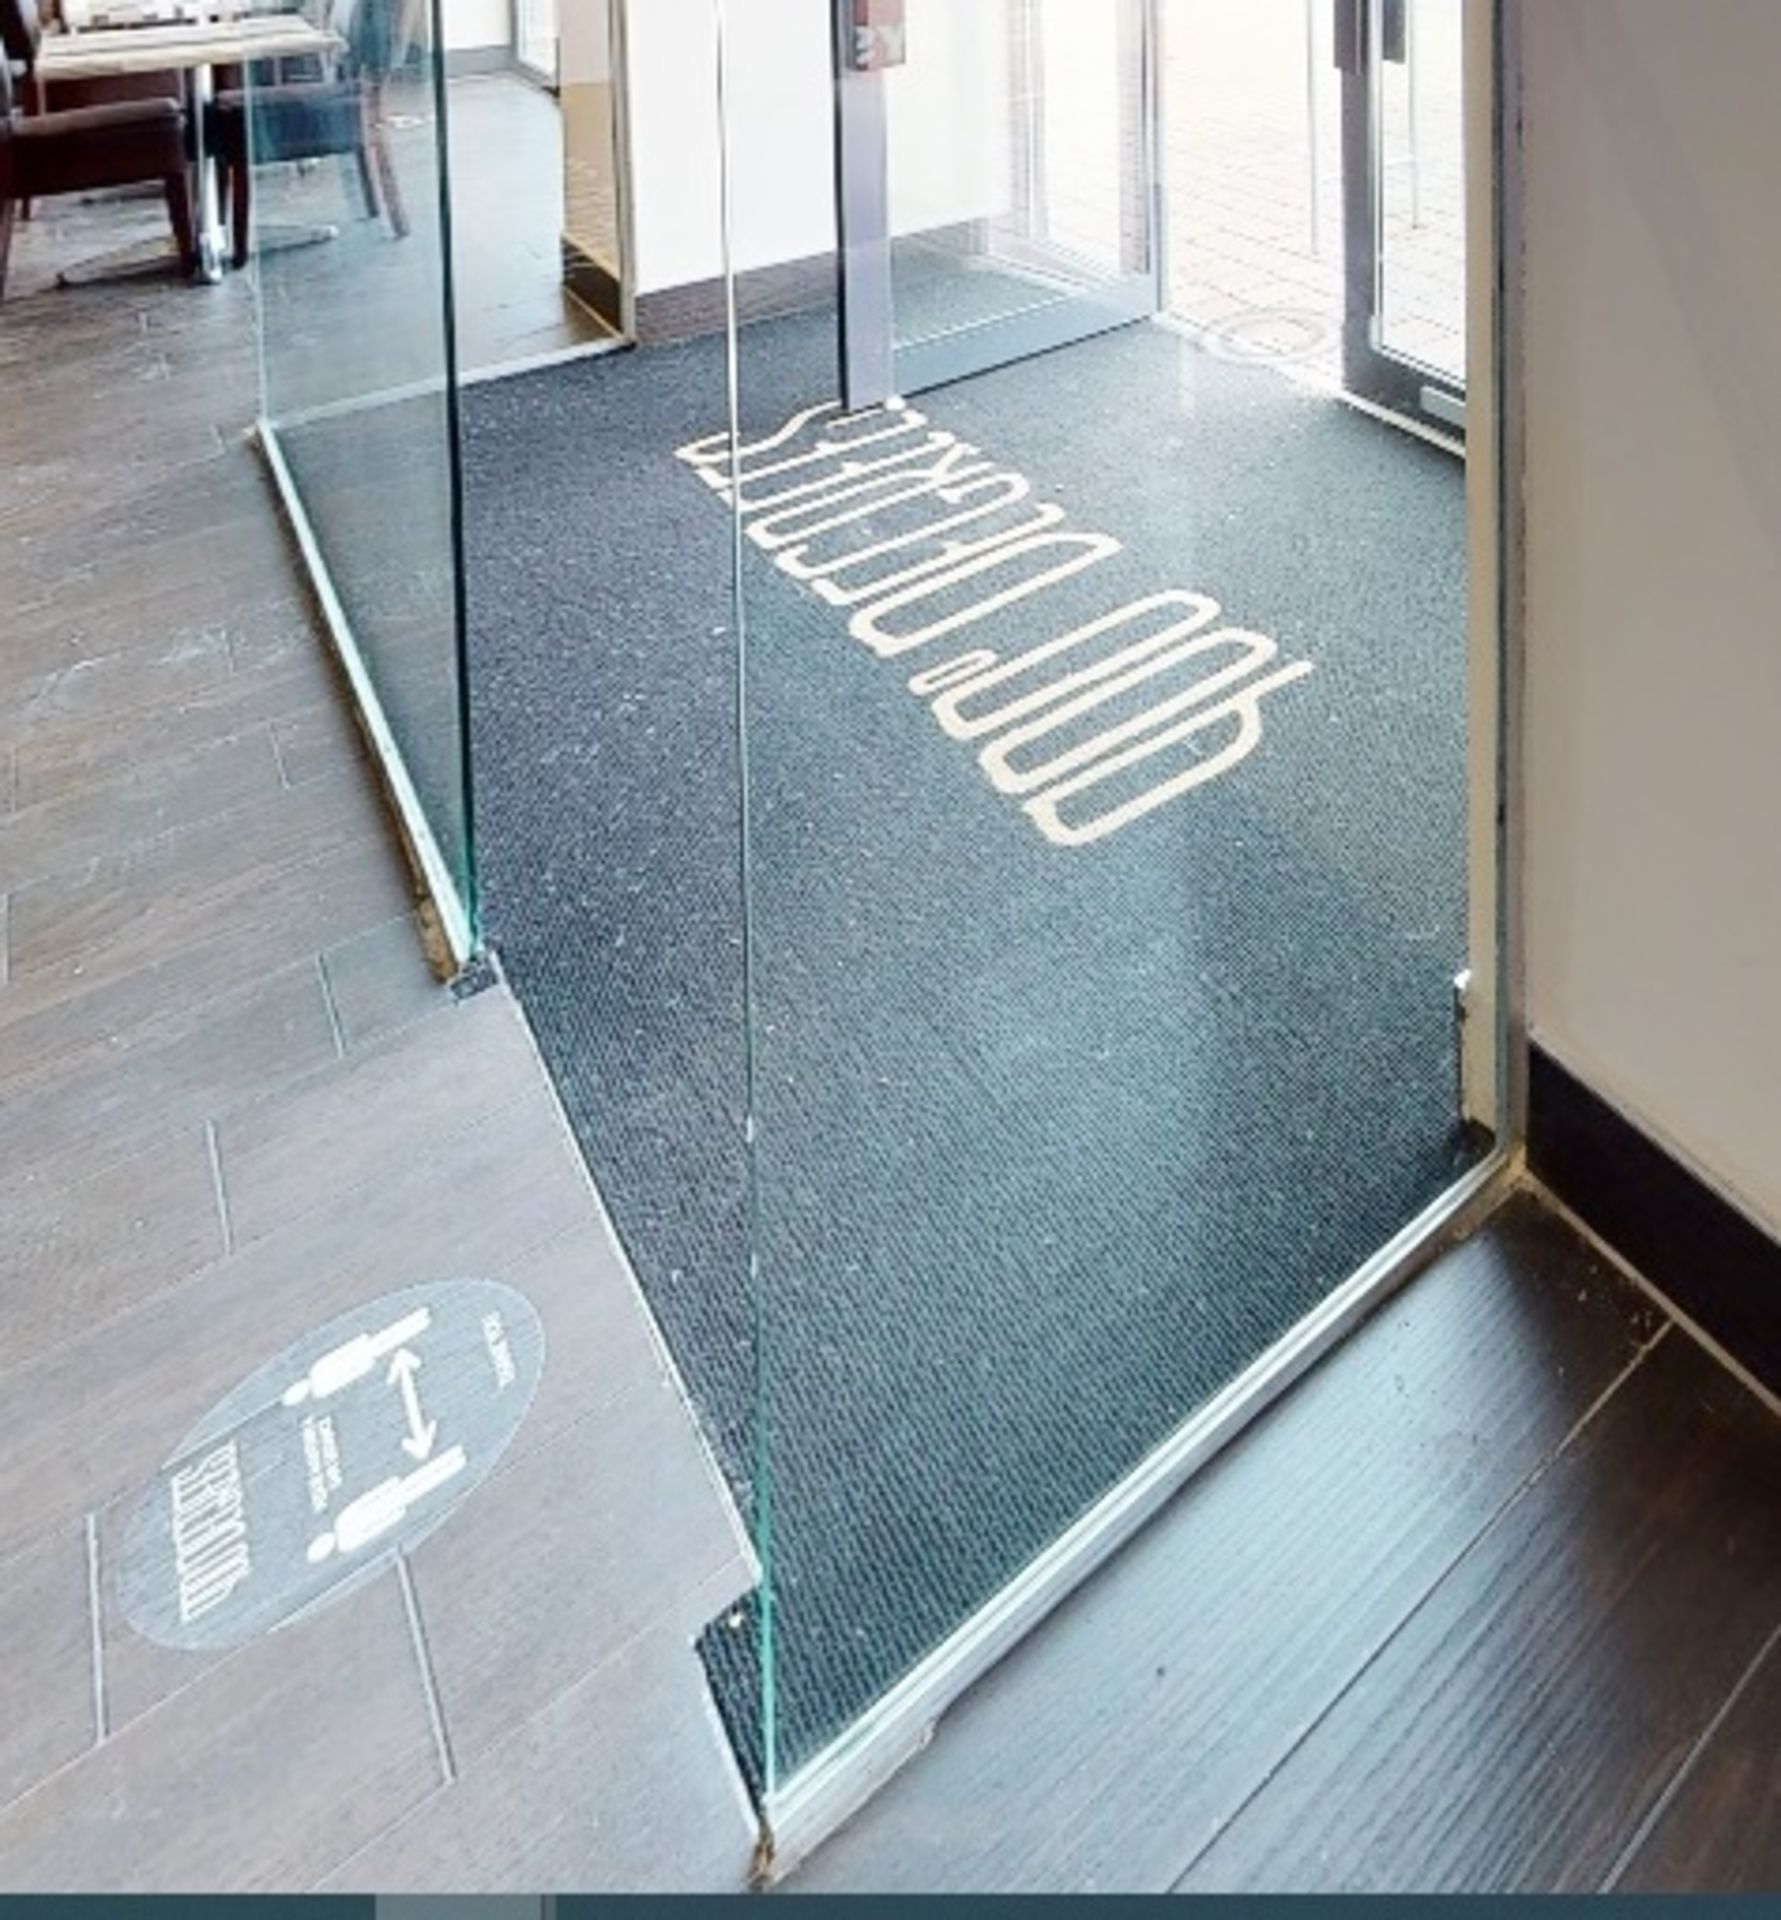 1 x Commercial Entry Anti-Slip Entrance Mat - Size Approx 310 x 160 cms - CL701 - Location: Ashton - Image 4 of 4